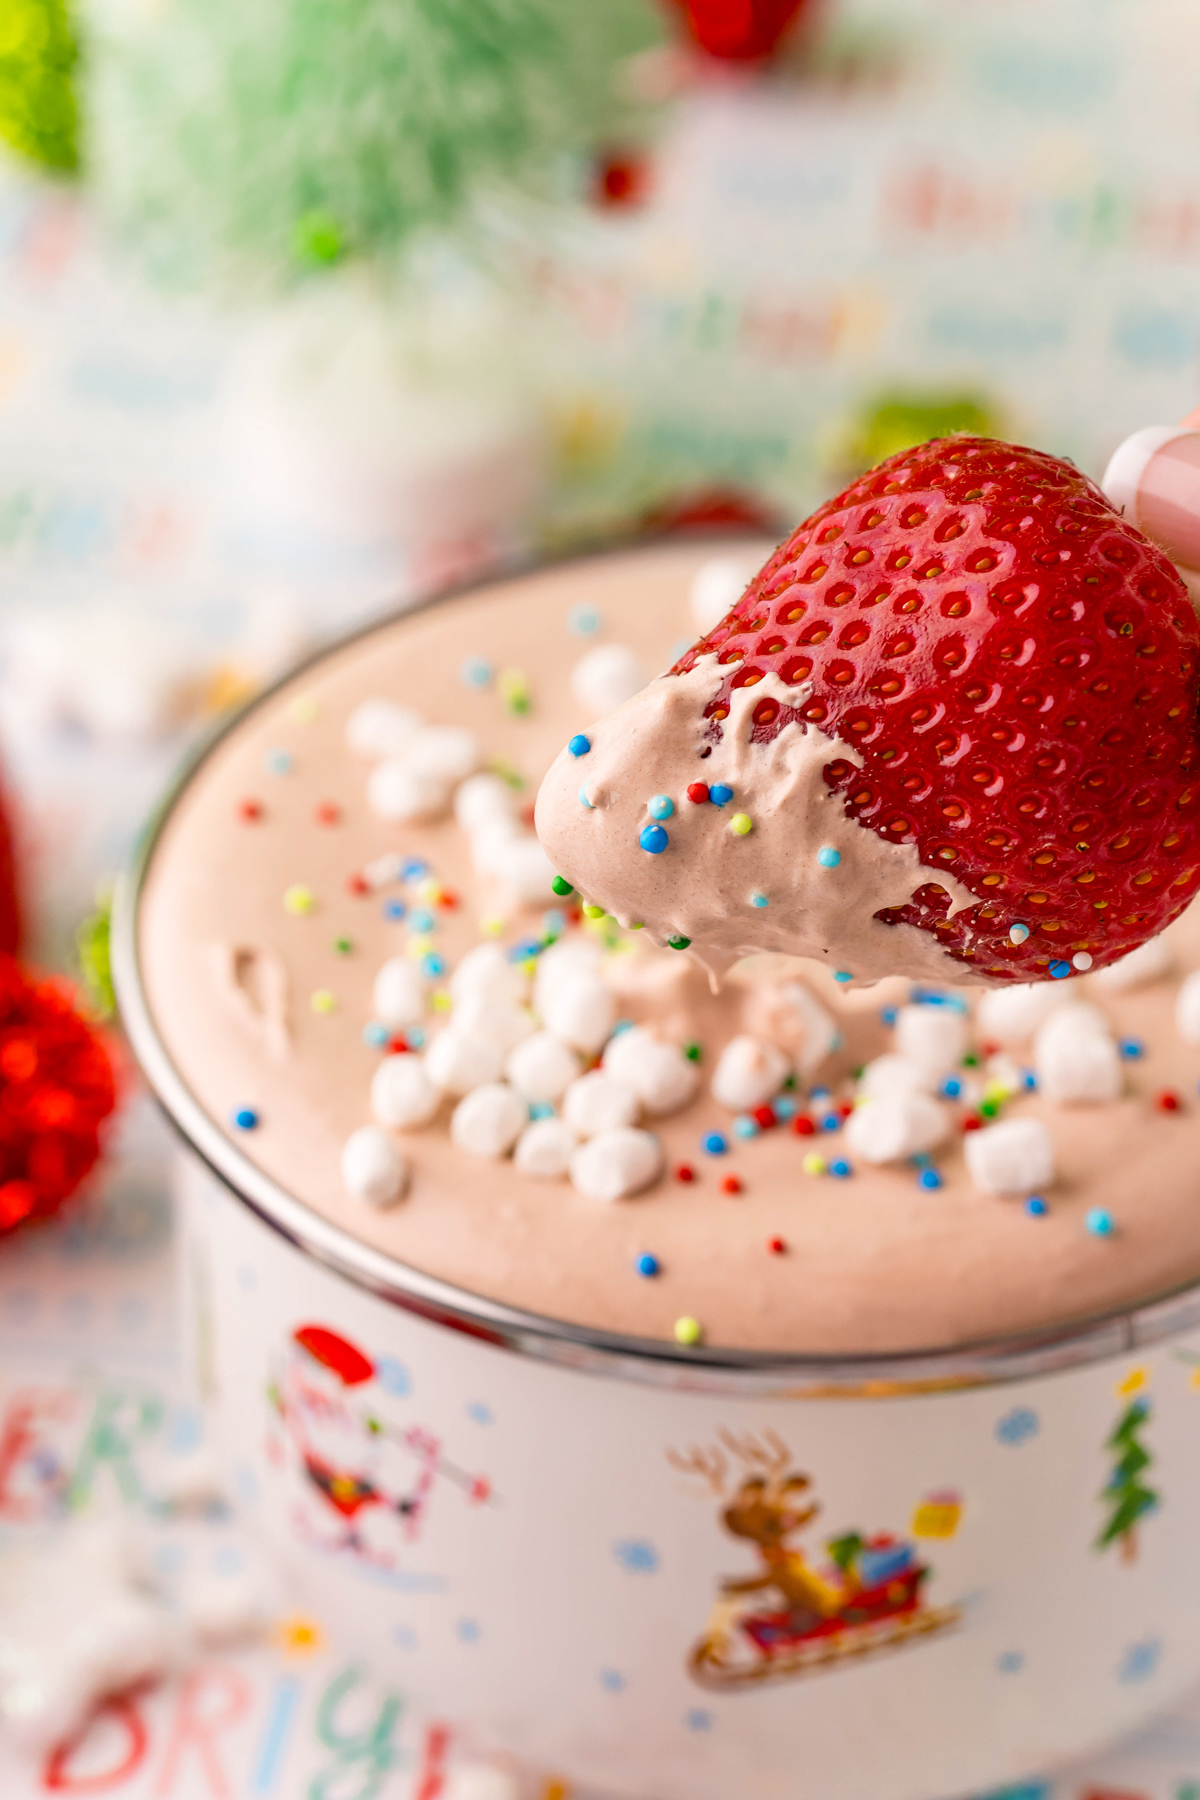 strawberry above a hot chocolate dip